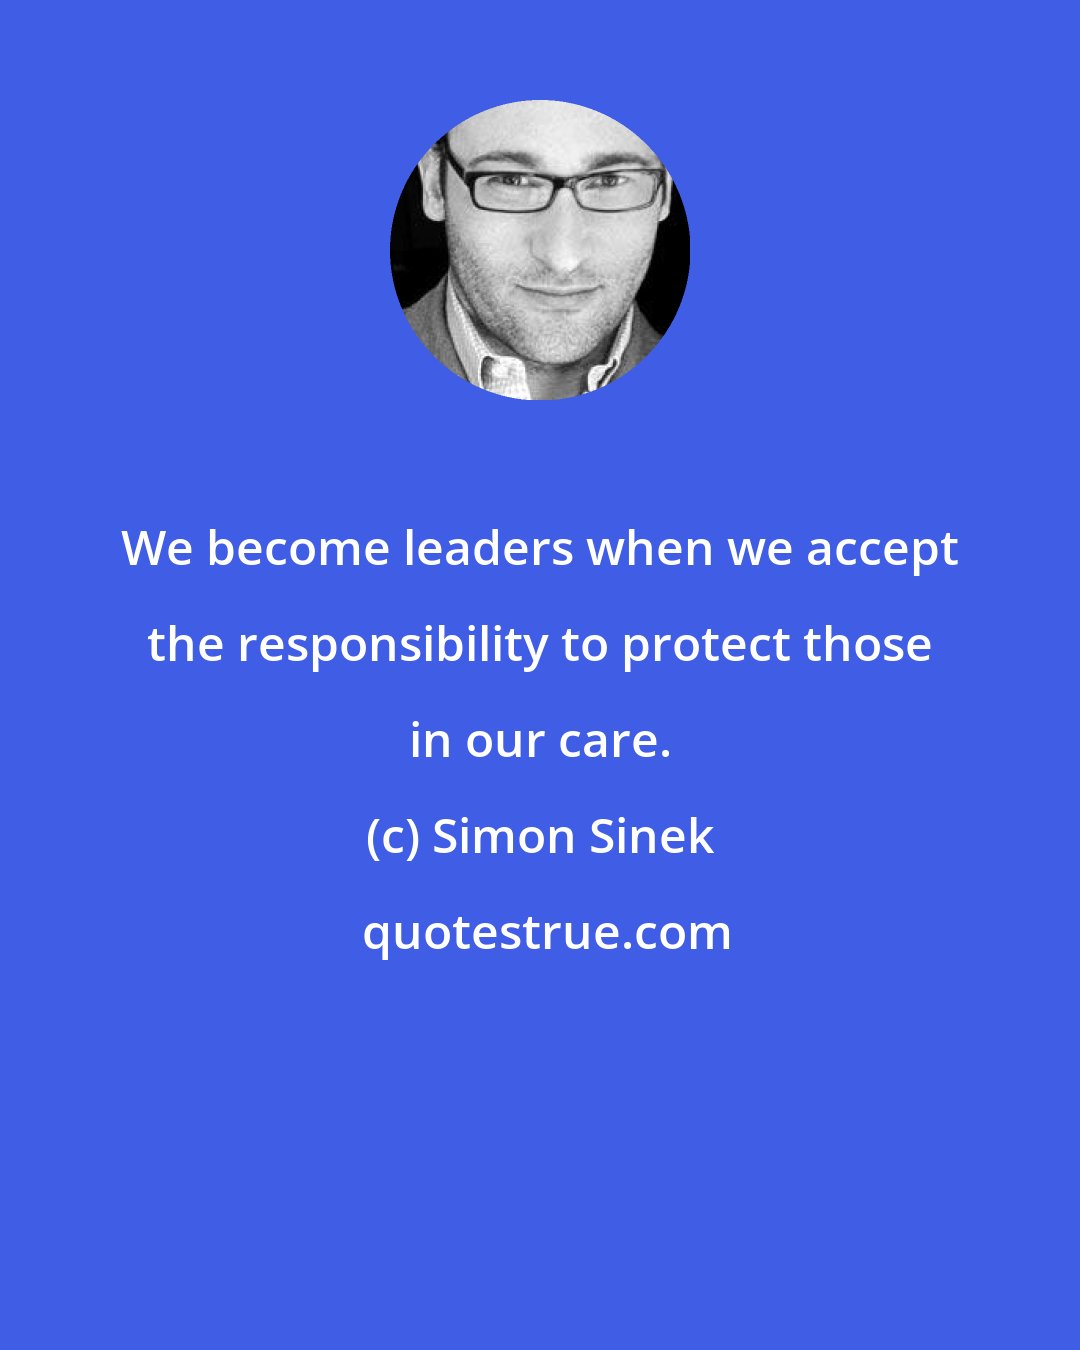 Simon Sinek: We become leaders when we accept the responsibility to protect those in our care.